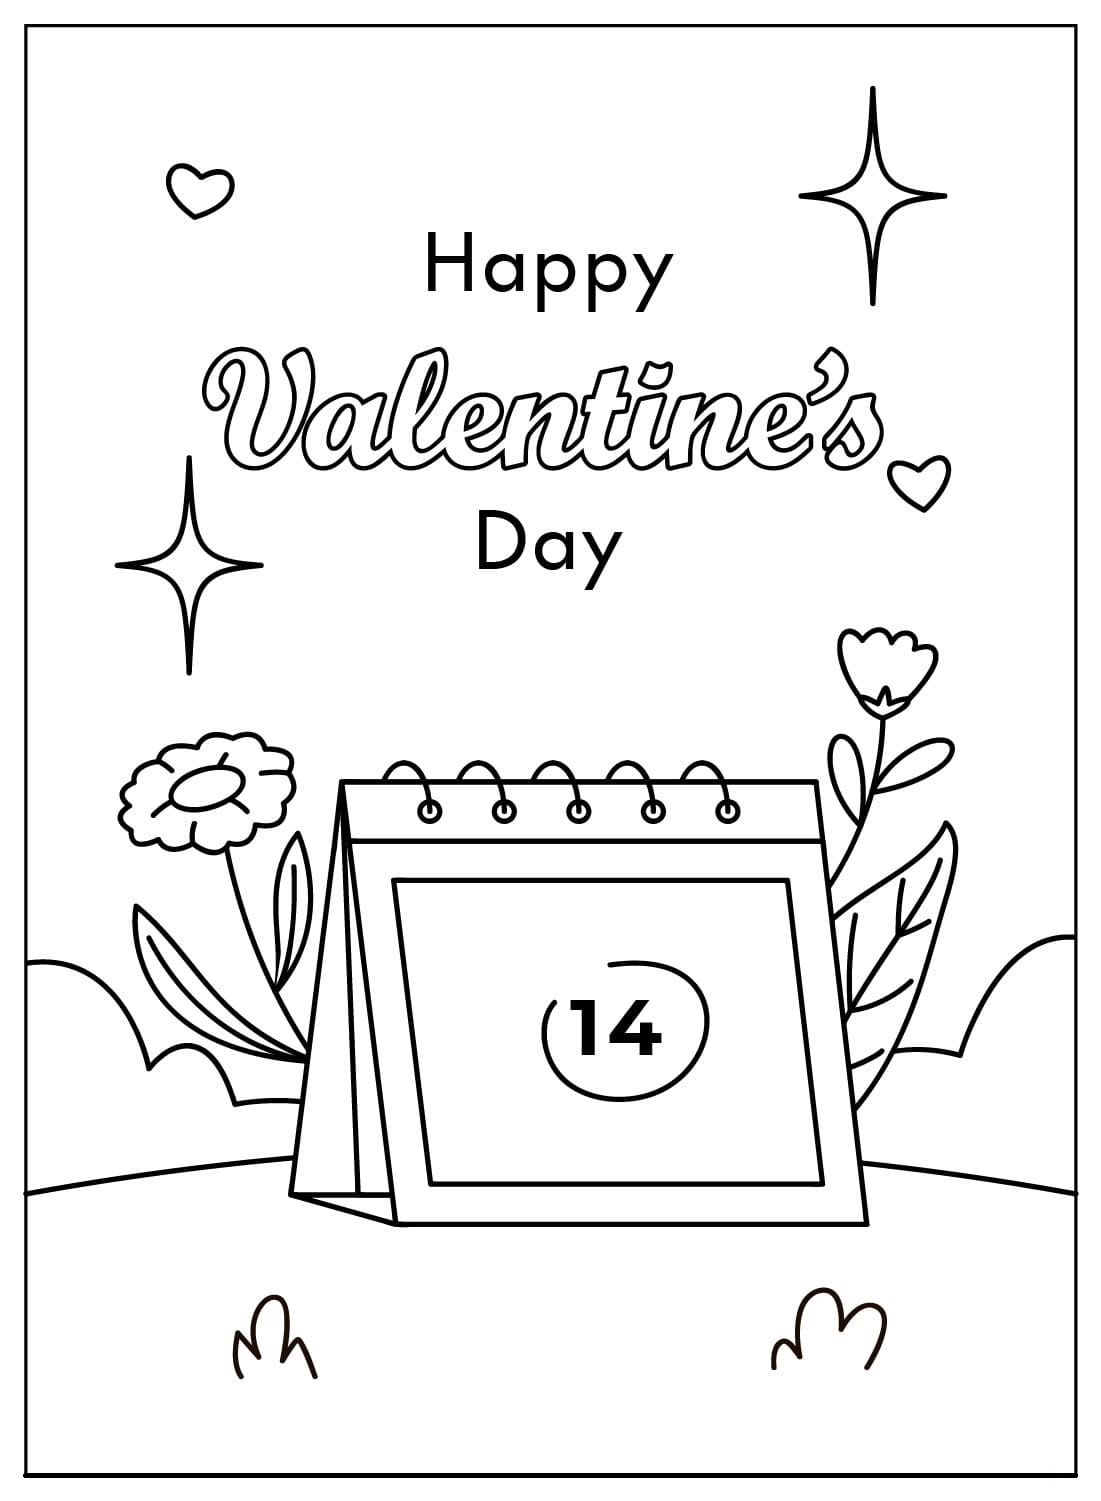 Valentines Day Cards Coloring Page Printable